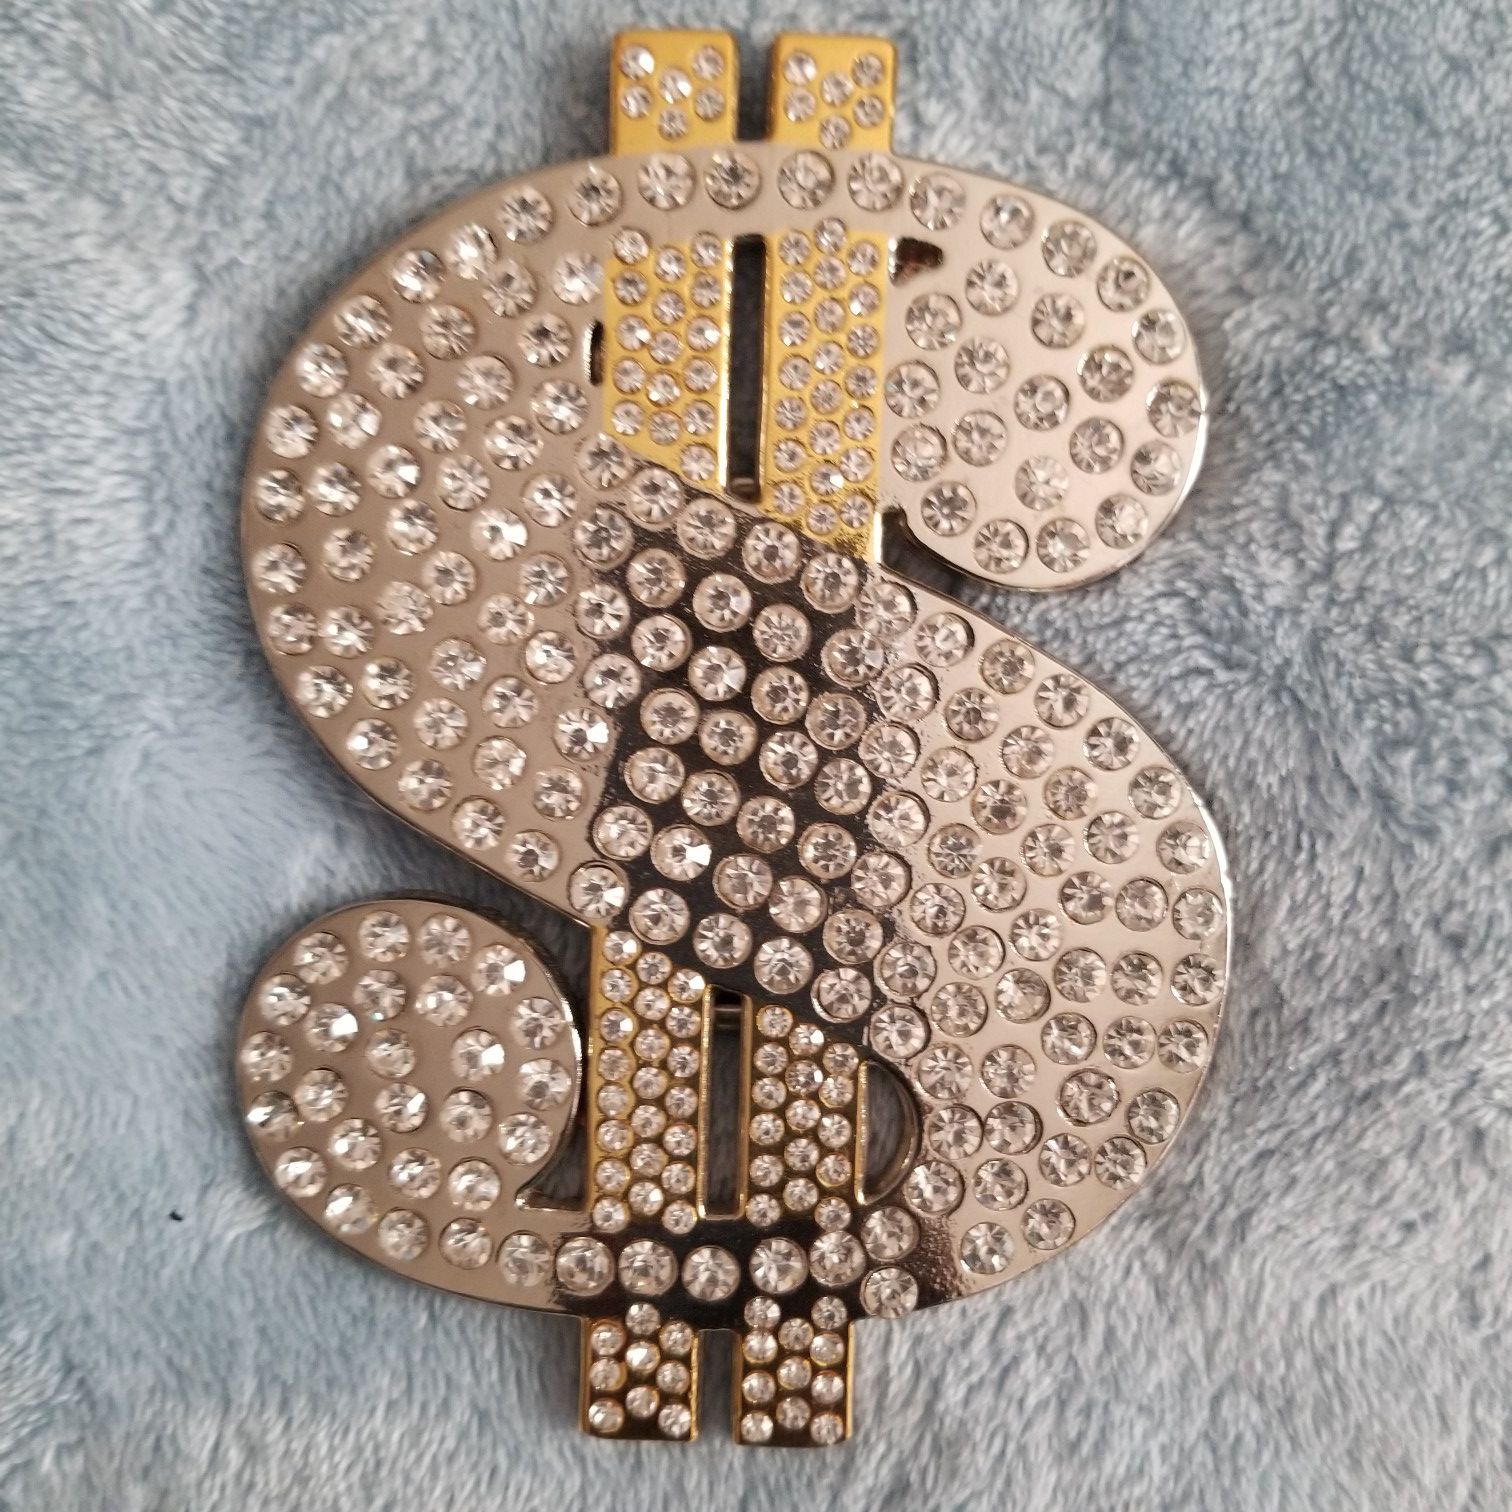 2-Tone Dollar Sign Blinged Out Belt Buckle